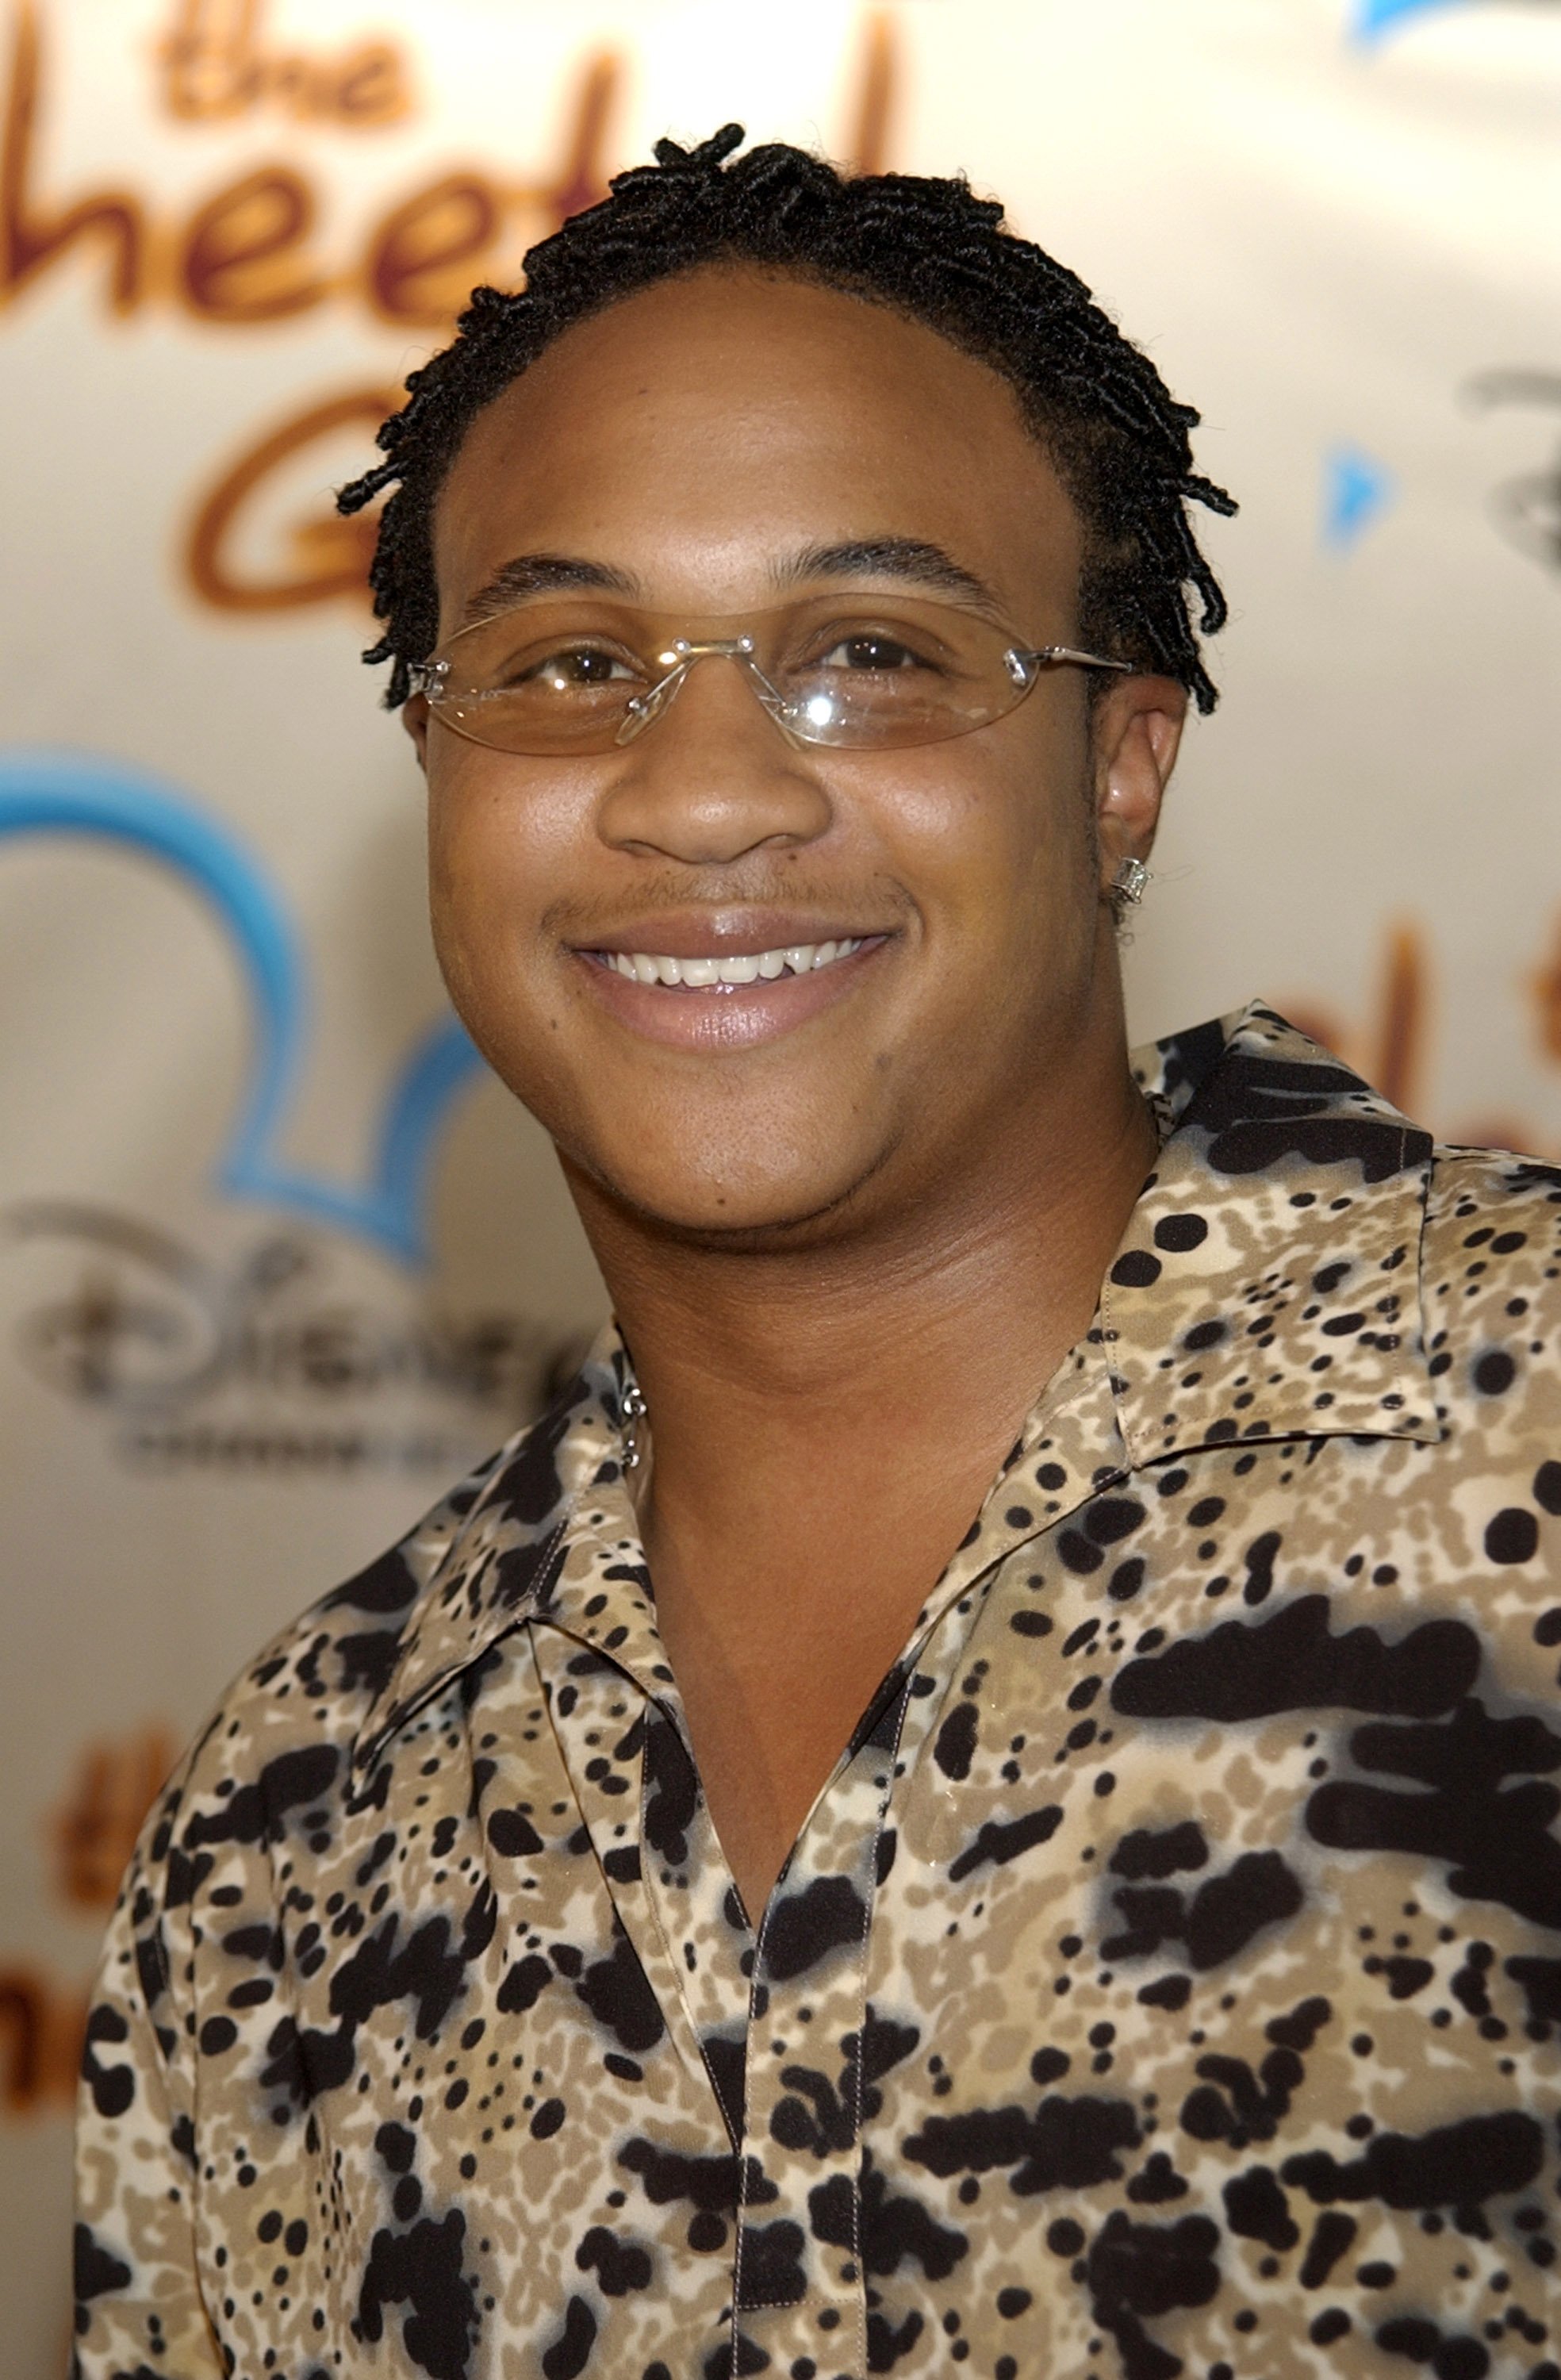 Orlando Brown during New York Premiere of Disney's "The Cheetah Girls" at La Guardia High School in New York City. I Source: Getty Images